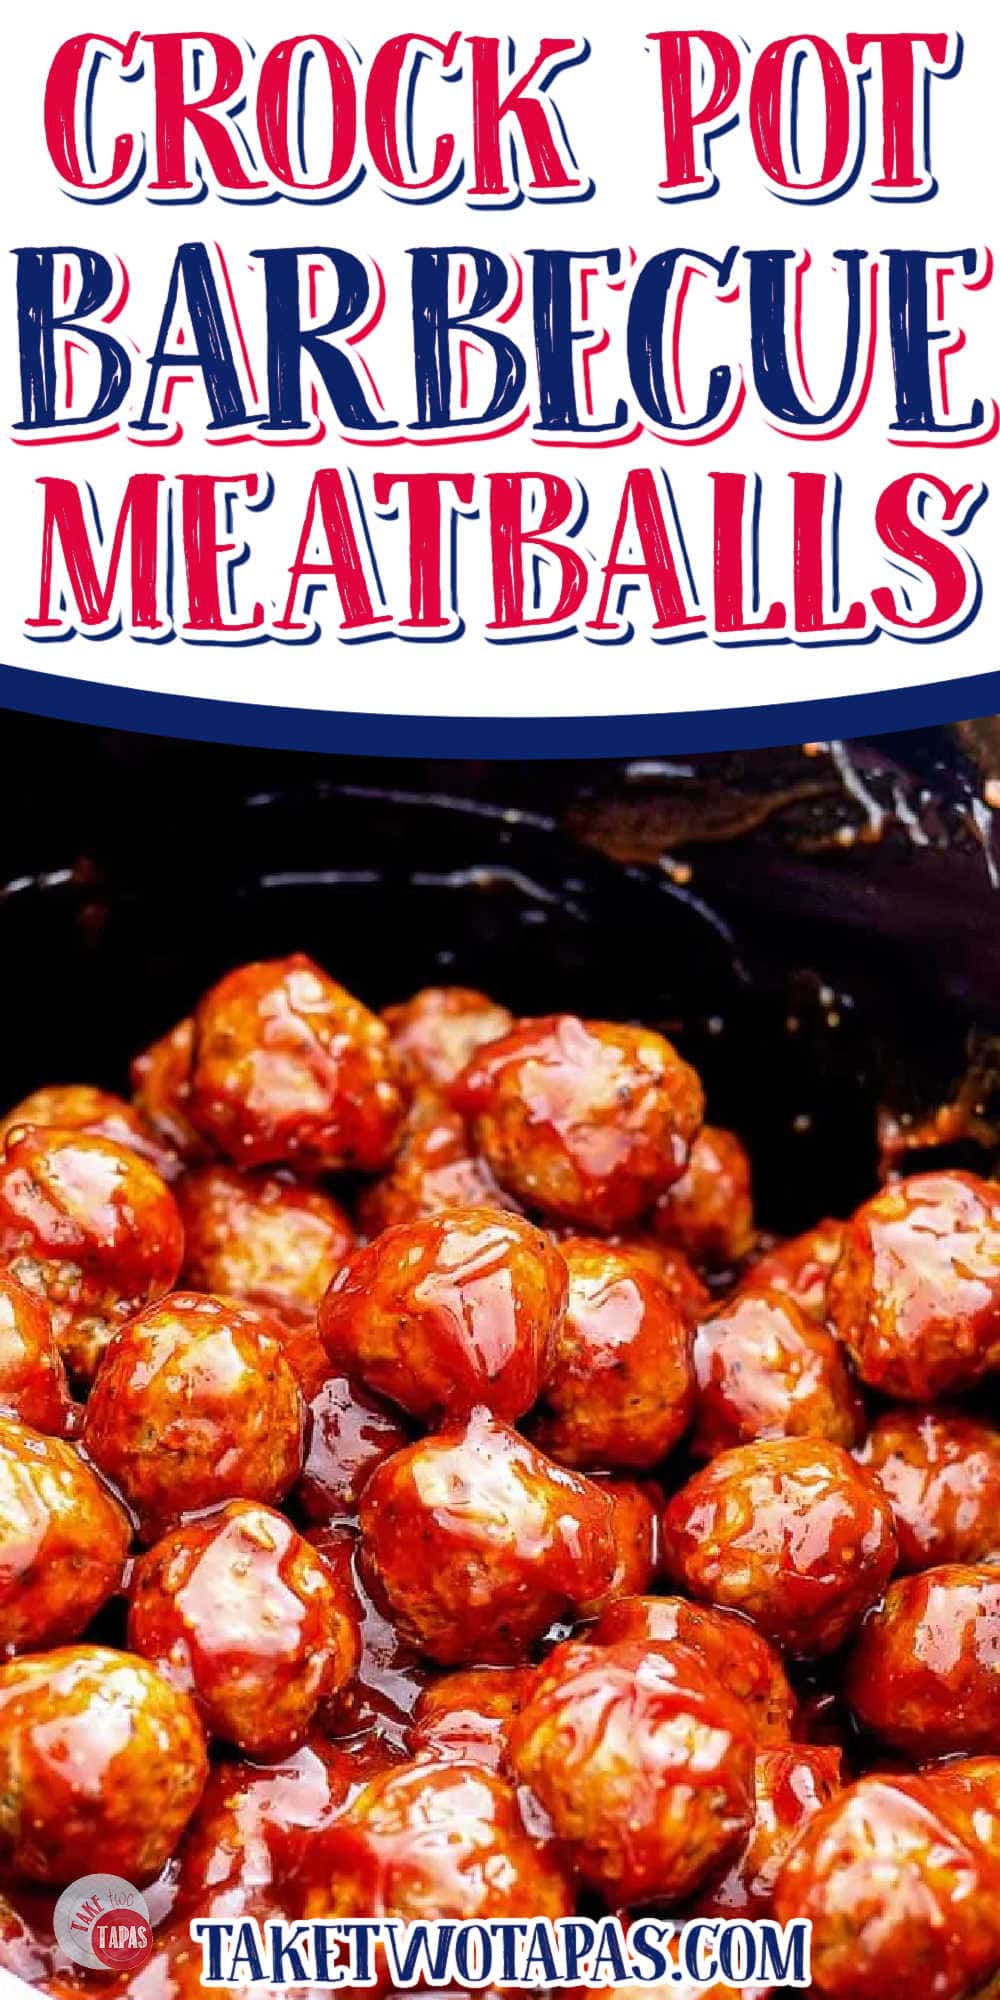 meatballs with text "how to make steakhouse bbq party meatballs"